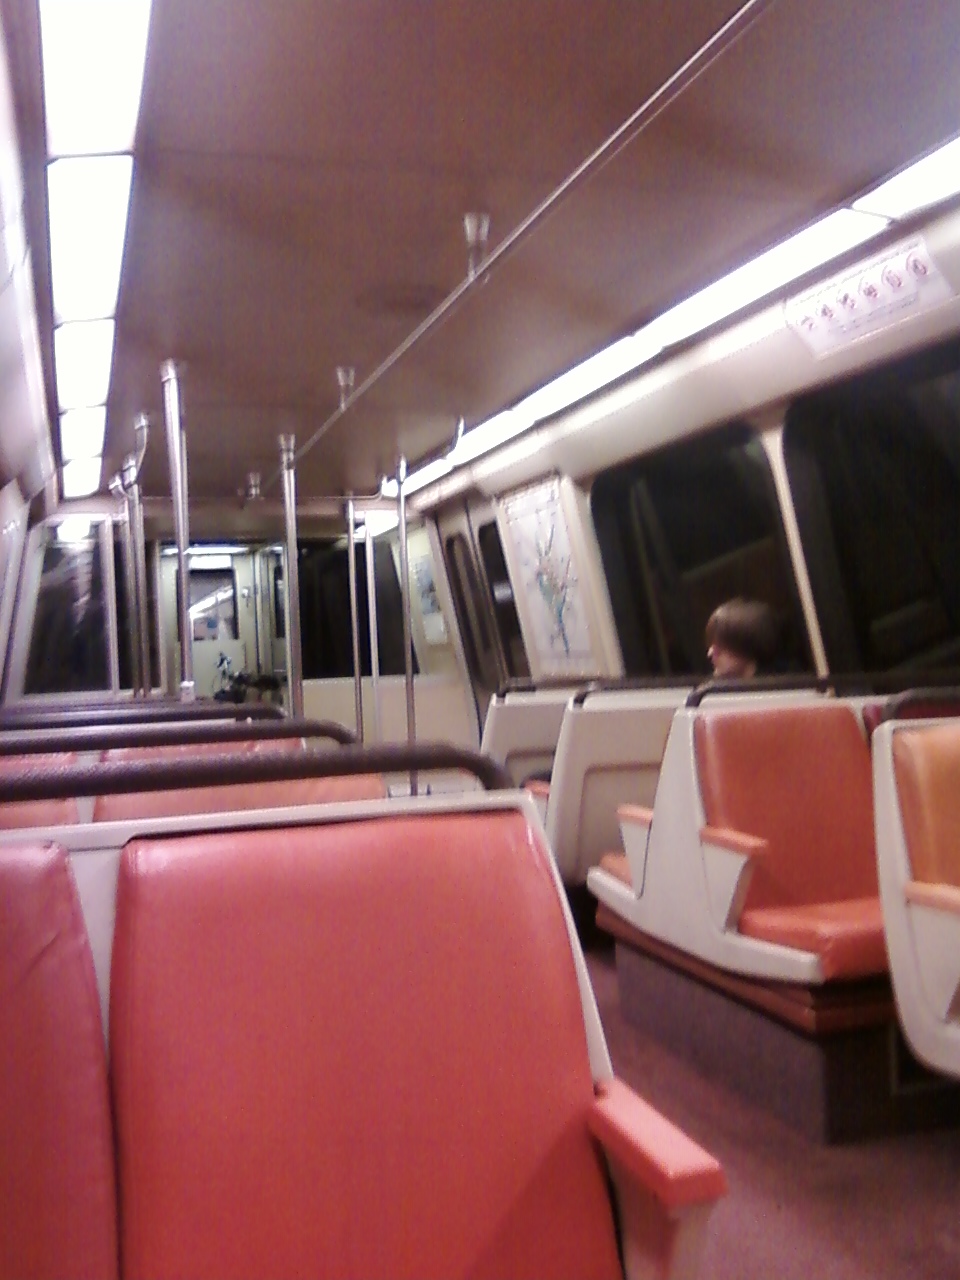 WMATA/DC Metro 1000 series car
interior. Note the simple, straight lines, padded seats, slip-resistant
and noise-reducing carpeting, and wind/noise door partition at the far
left door; the right partition was removed when the this 1000-series car
was renovated.